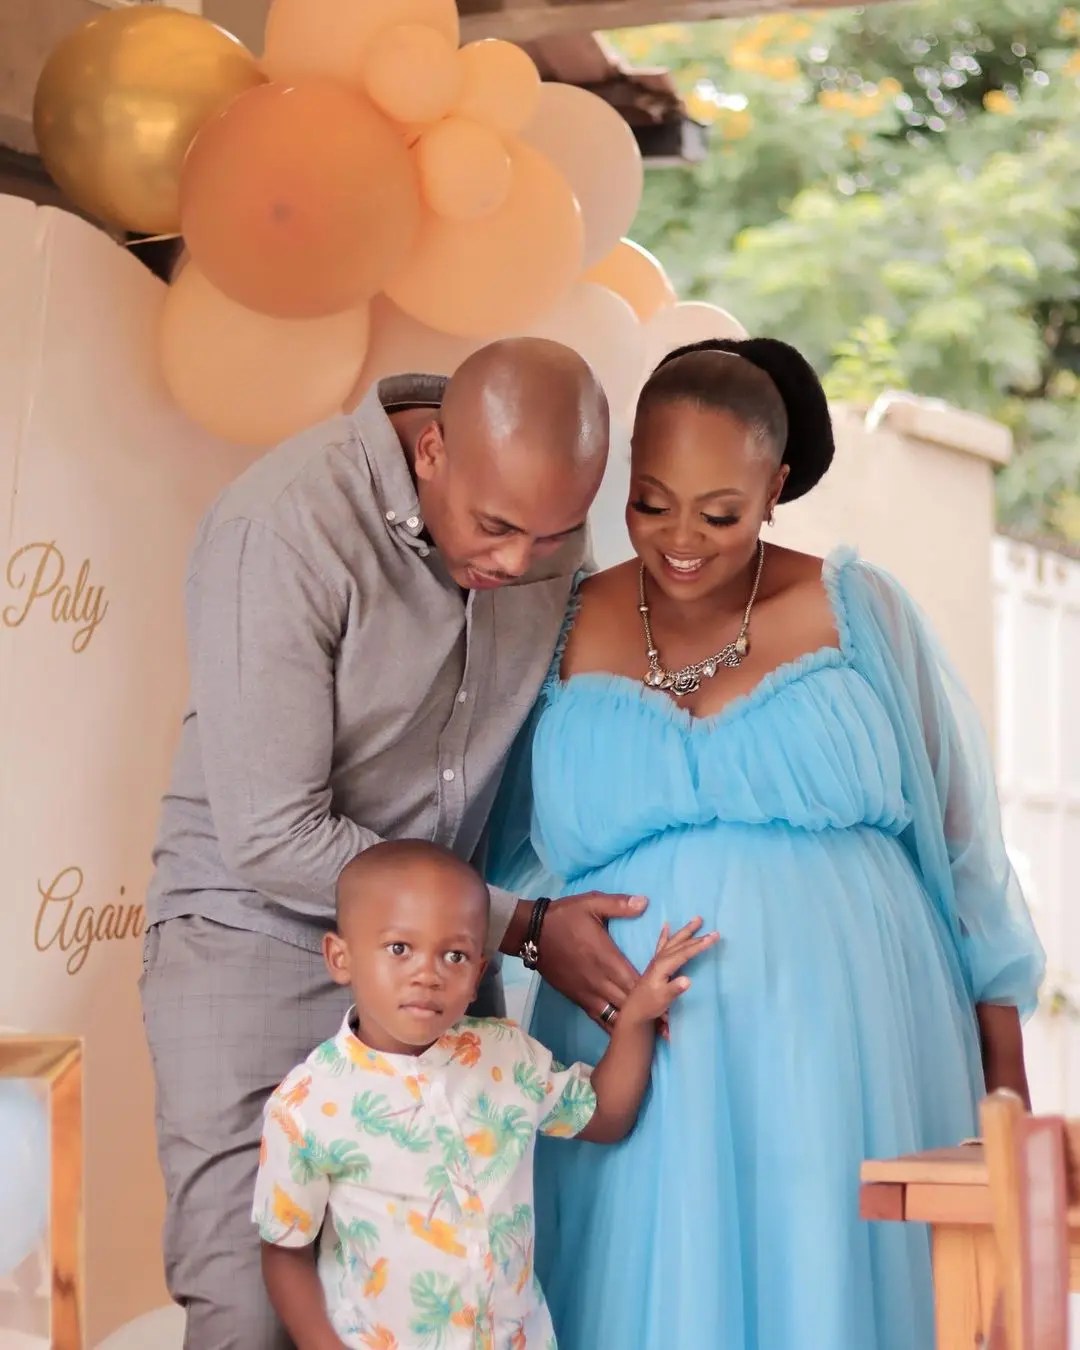 Mobi Dixon and wife expecting baby number 2